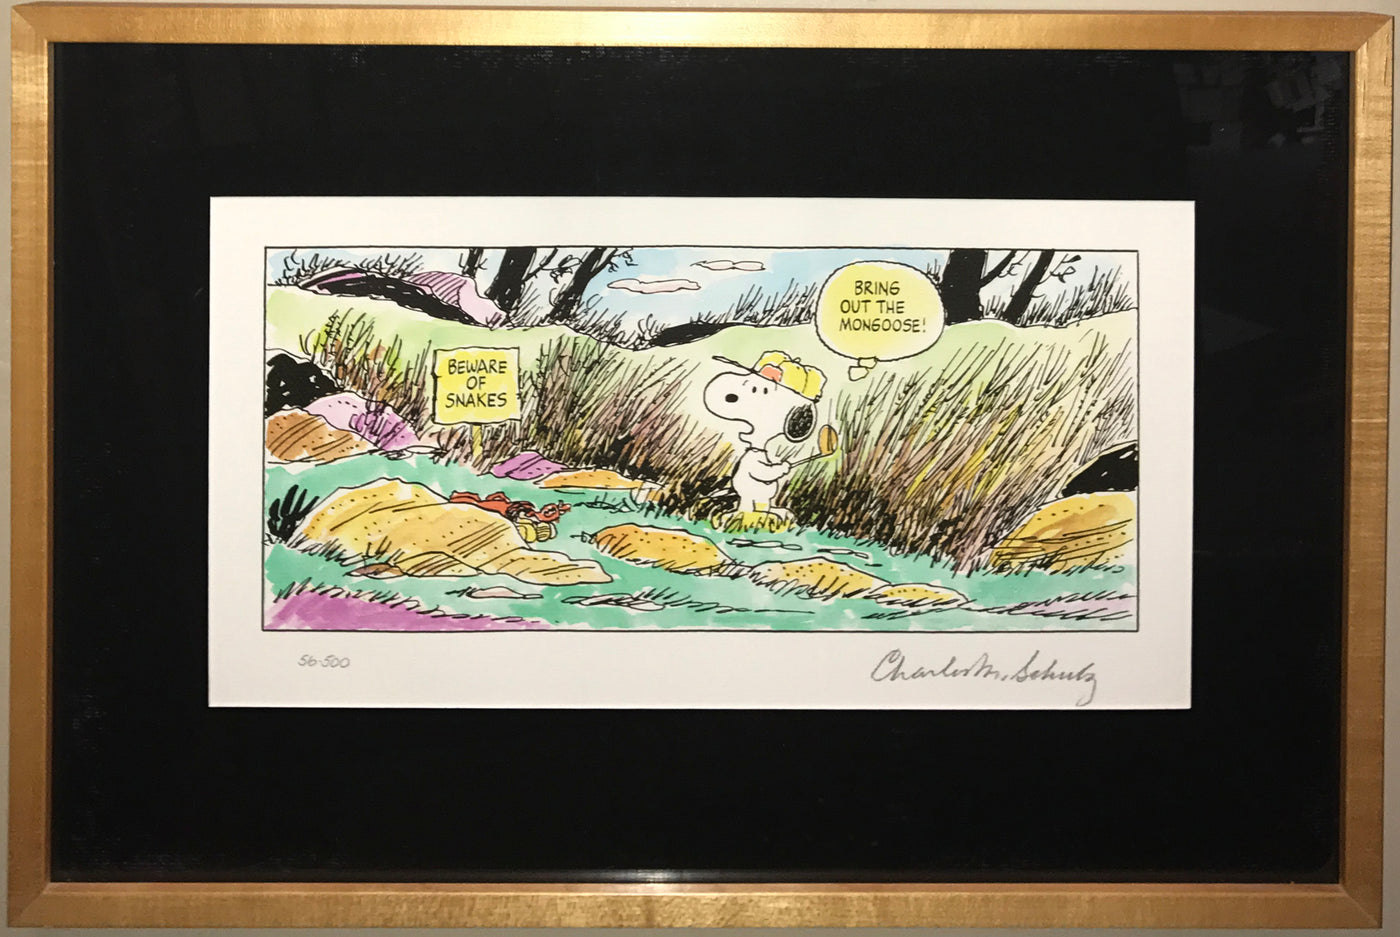 Peanuts Animation Art Limited Edition Lithograph Beware of Snakes